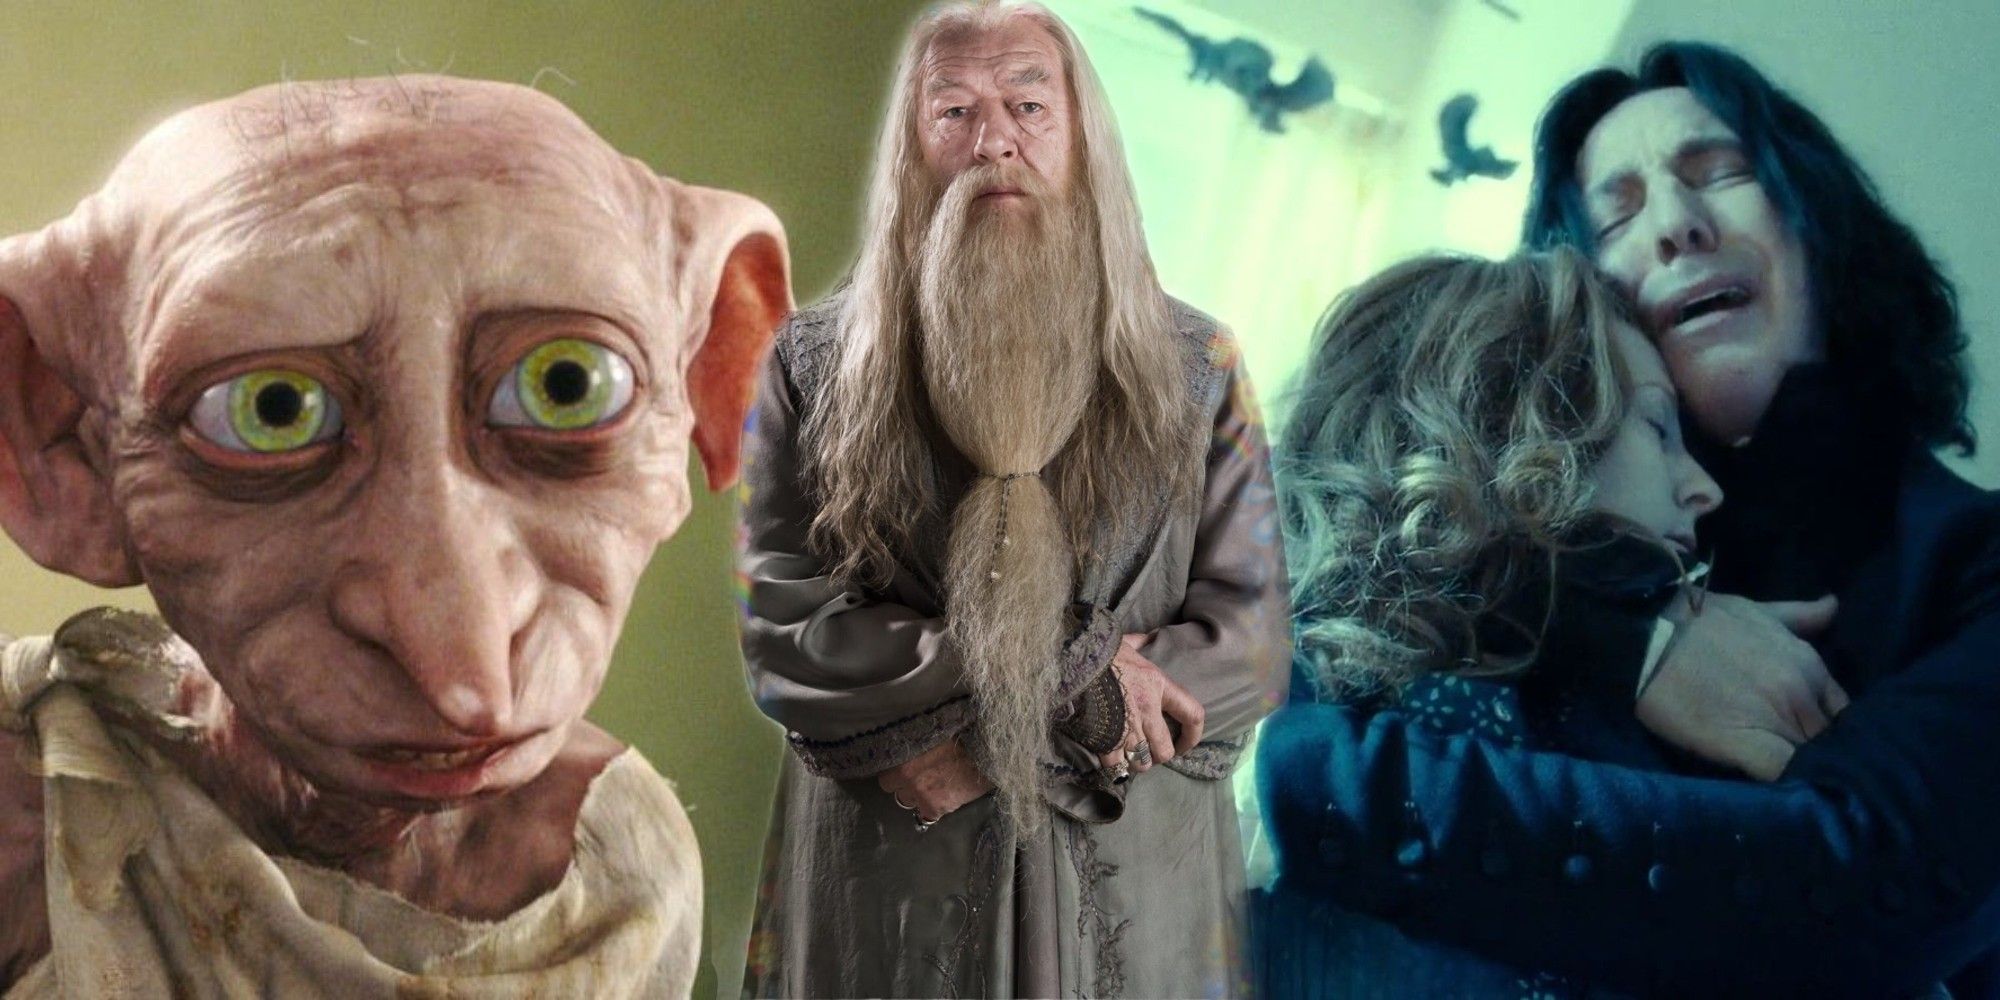 Split image of Dobby, Dumbledore and Snape in the Harry Potter movies